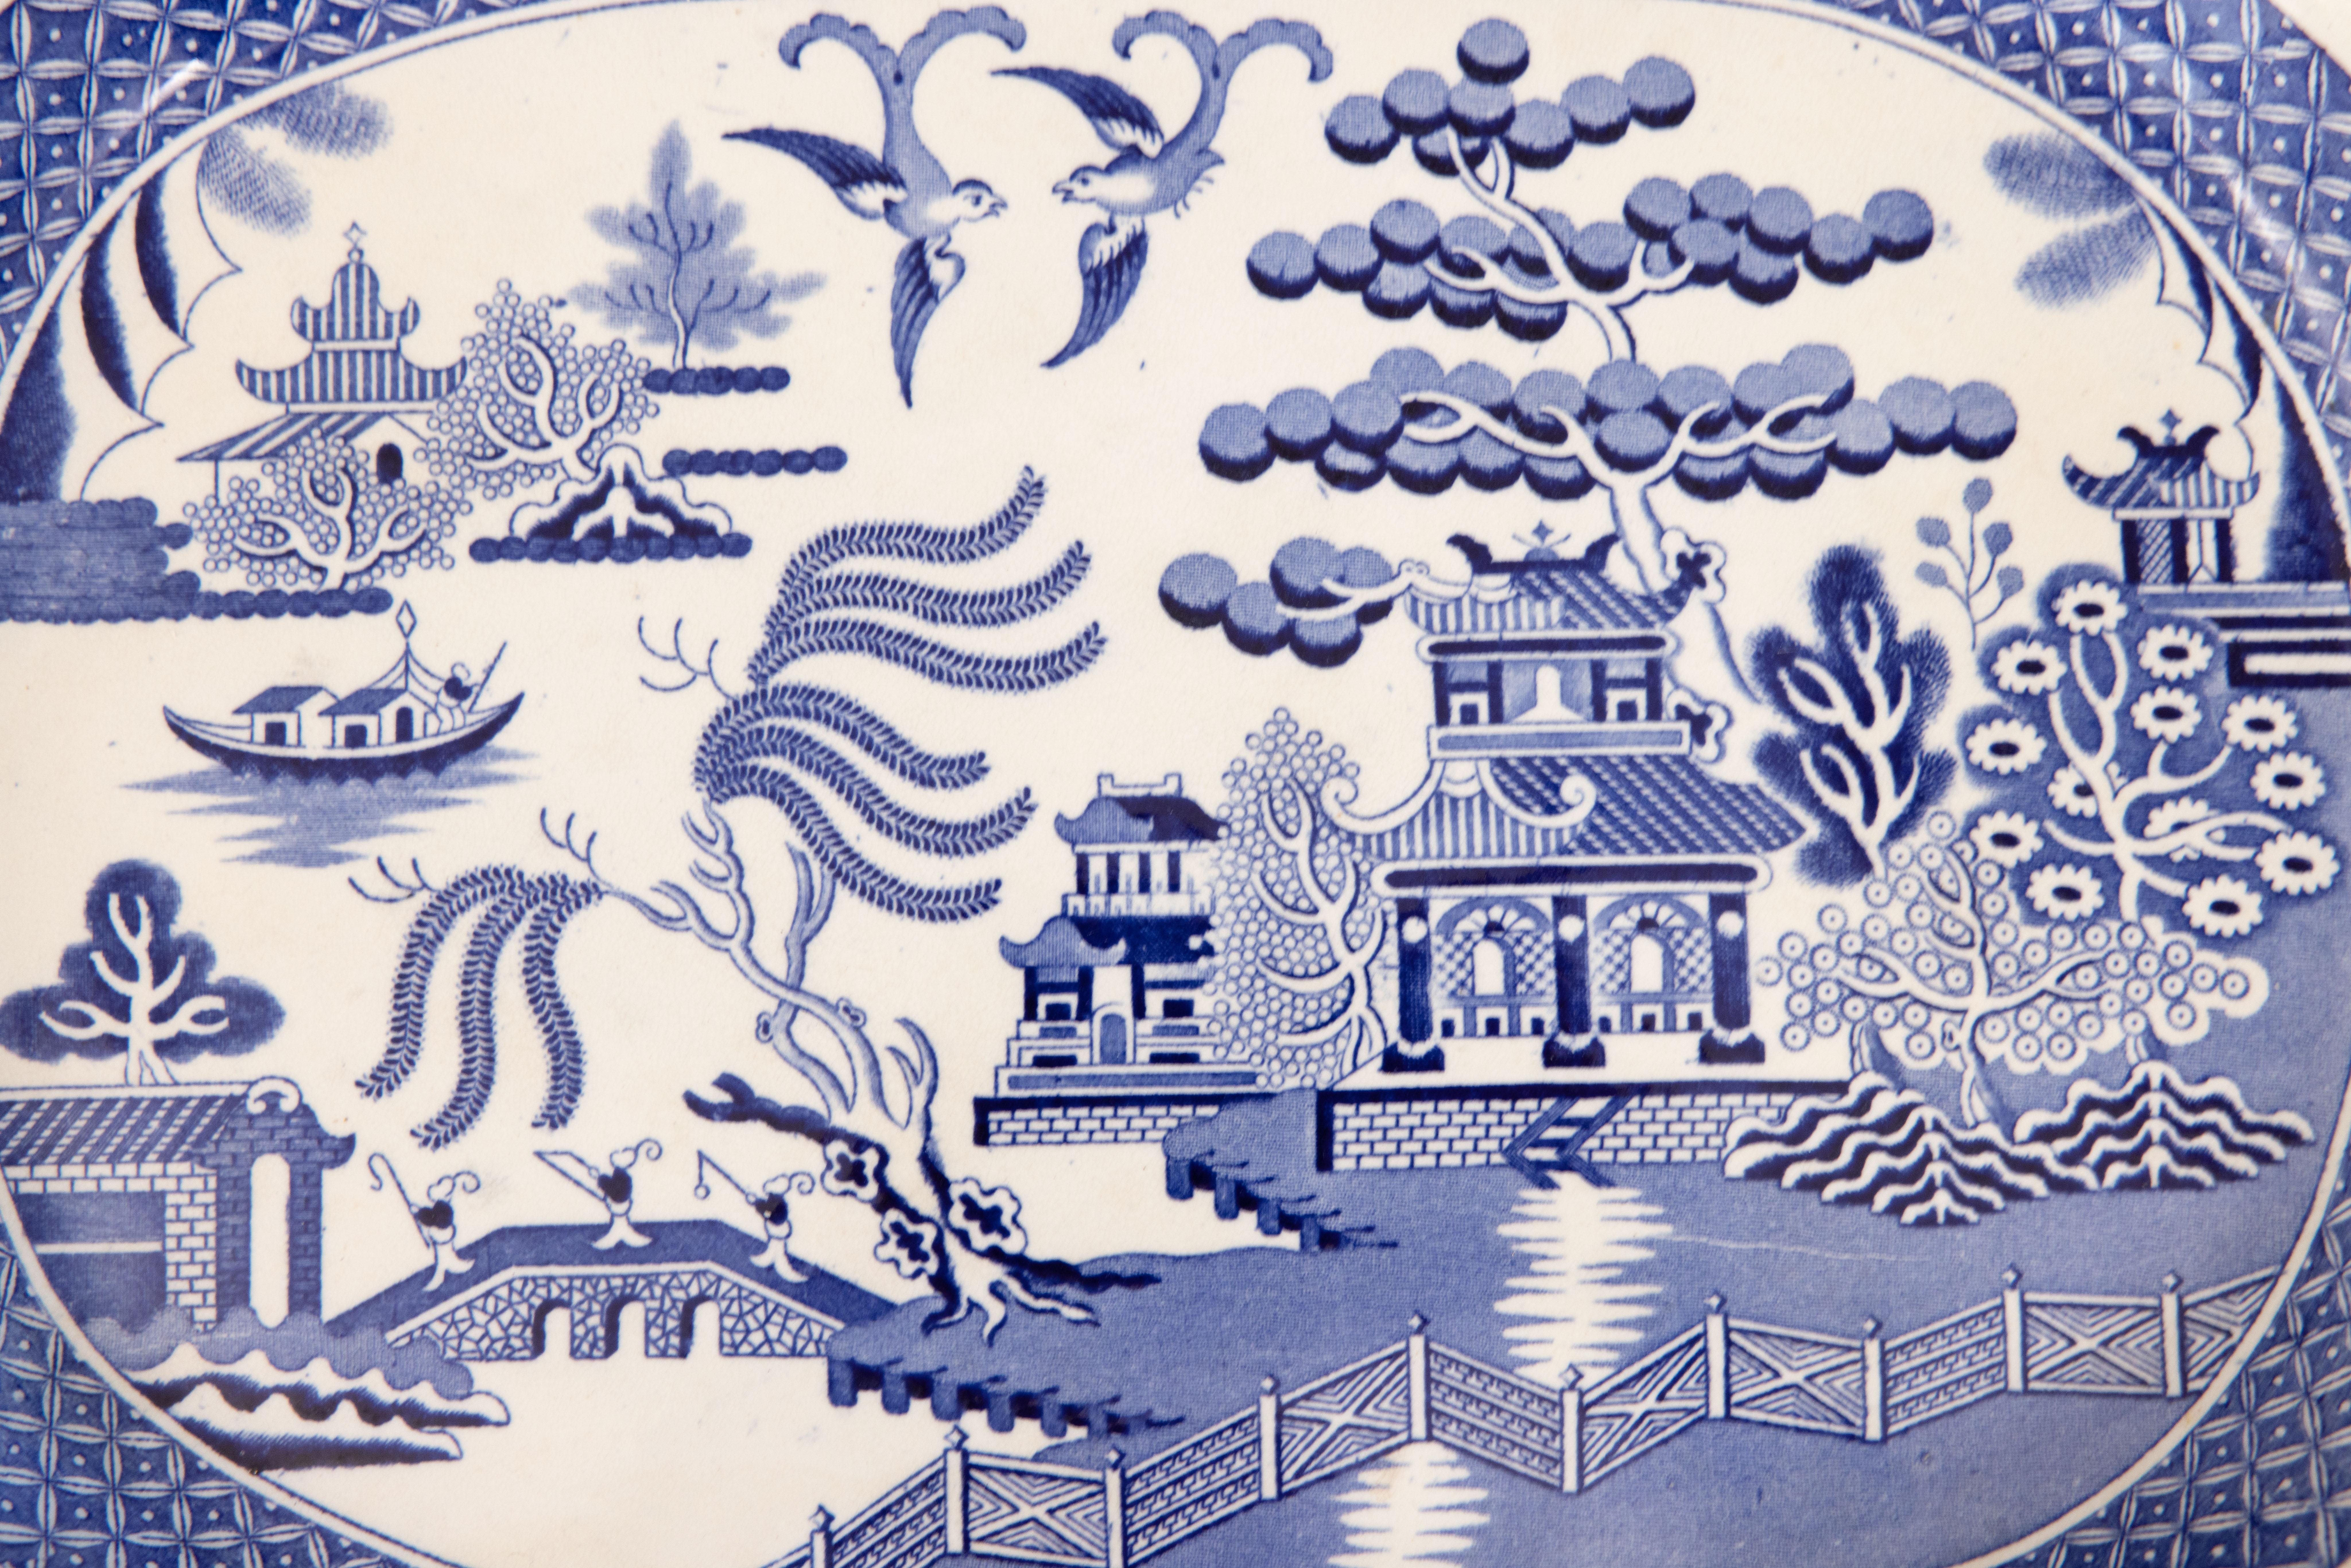 A superb 19th-century English Staffordshire transferware platter in the classic Blue Willow pattern. This lovely platter is a nice large size and heavy weighing over 5 lbs. It would be beautiful added to a collection or for serving or display.